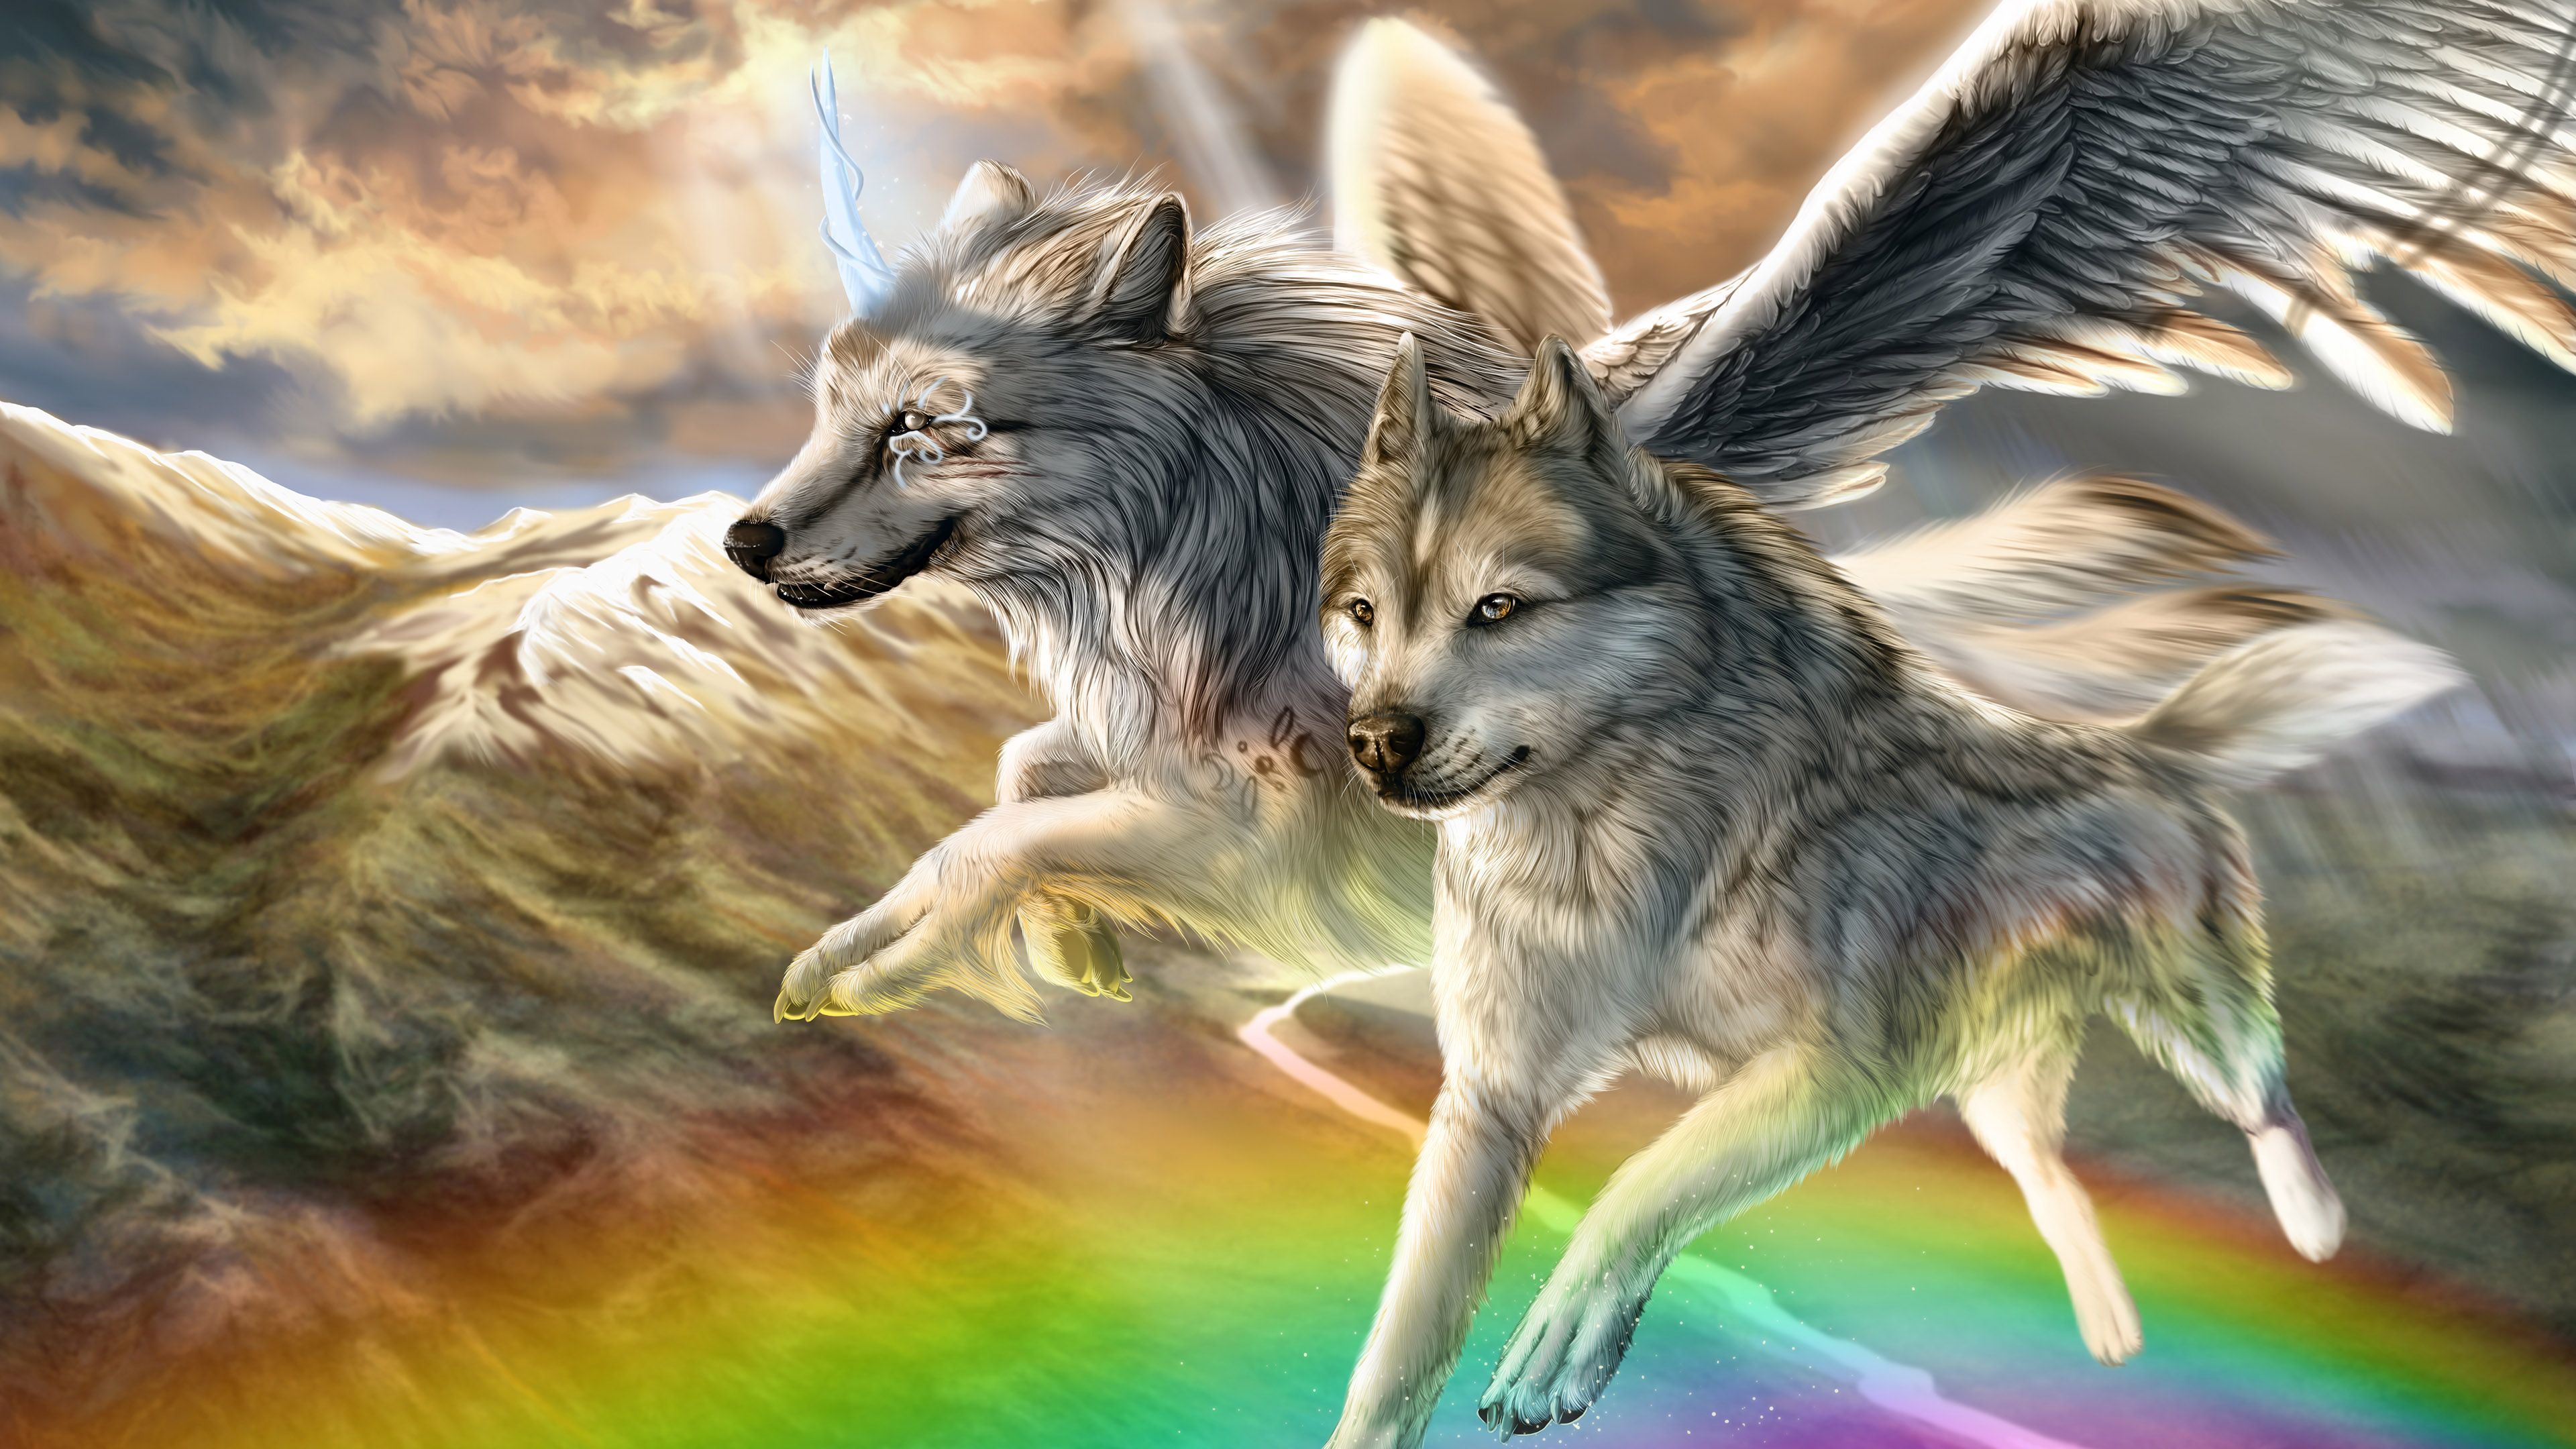 Rainbow Wolf With Wings Wallpaper